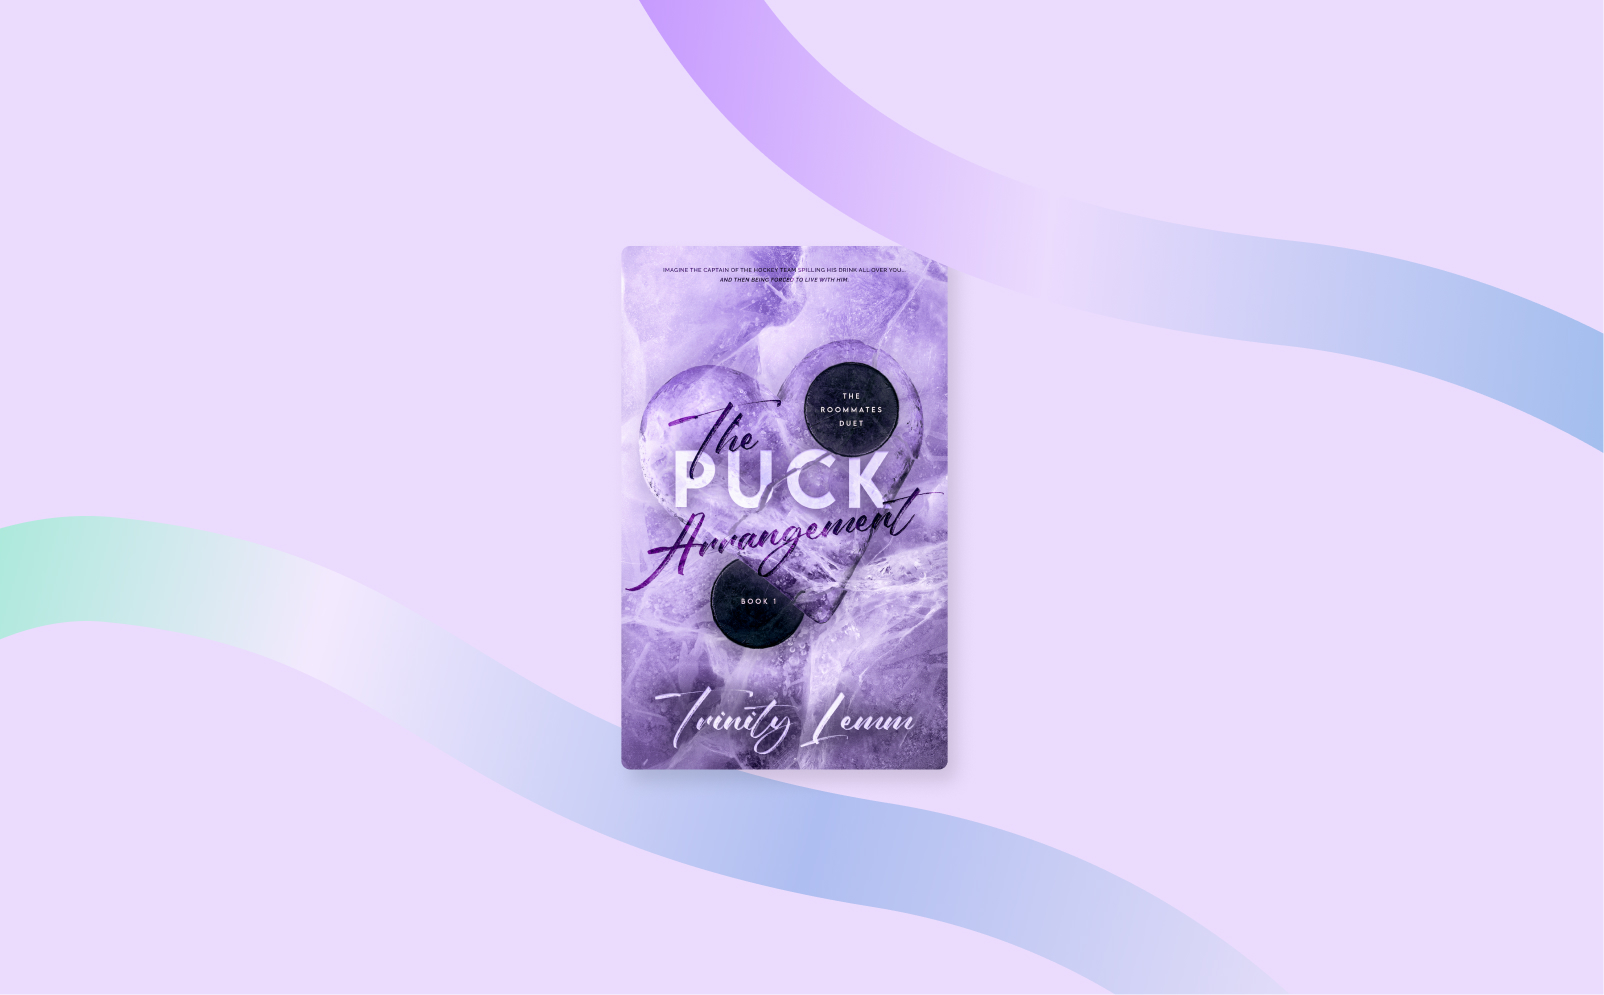 
                          Swoon Worthy Romance: An Author Interview with Trinity Lemm on The Puck Arrangment
                          